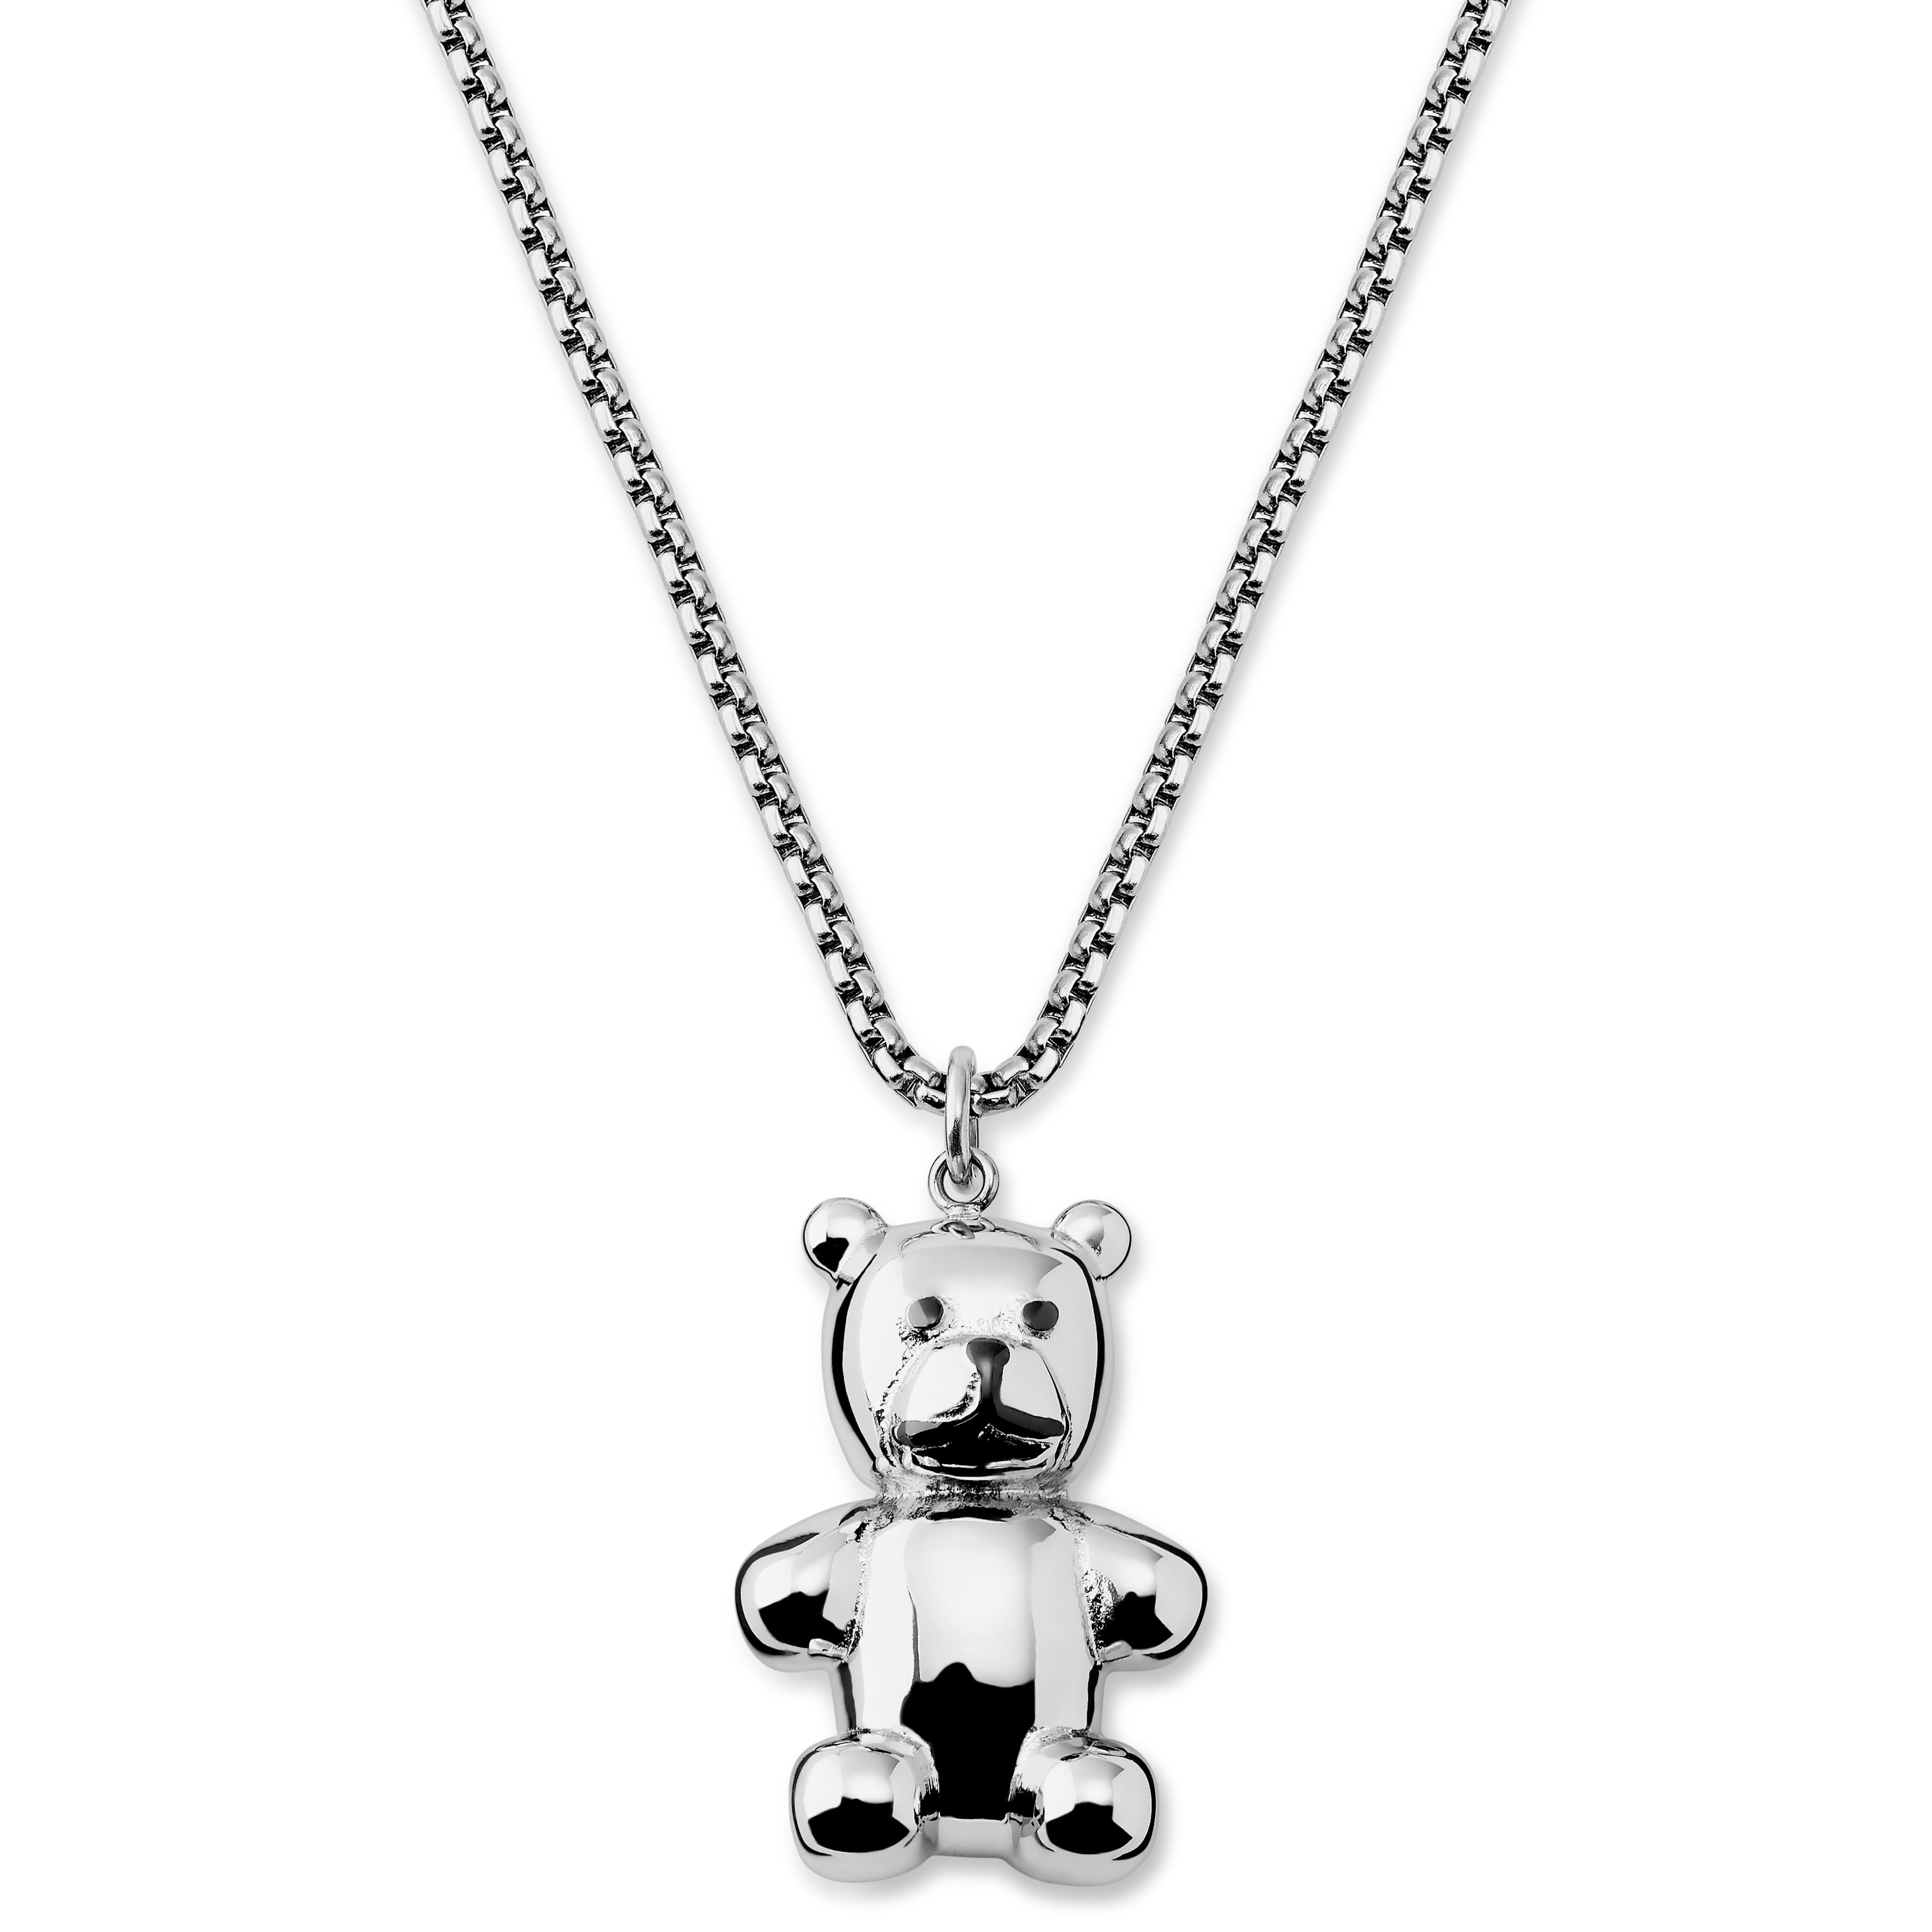 Heavy Sterling Silver Chain Necklace – The Golden Bear